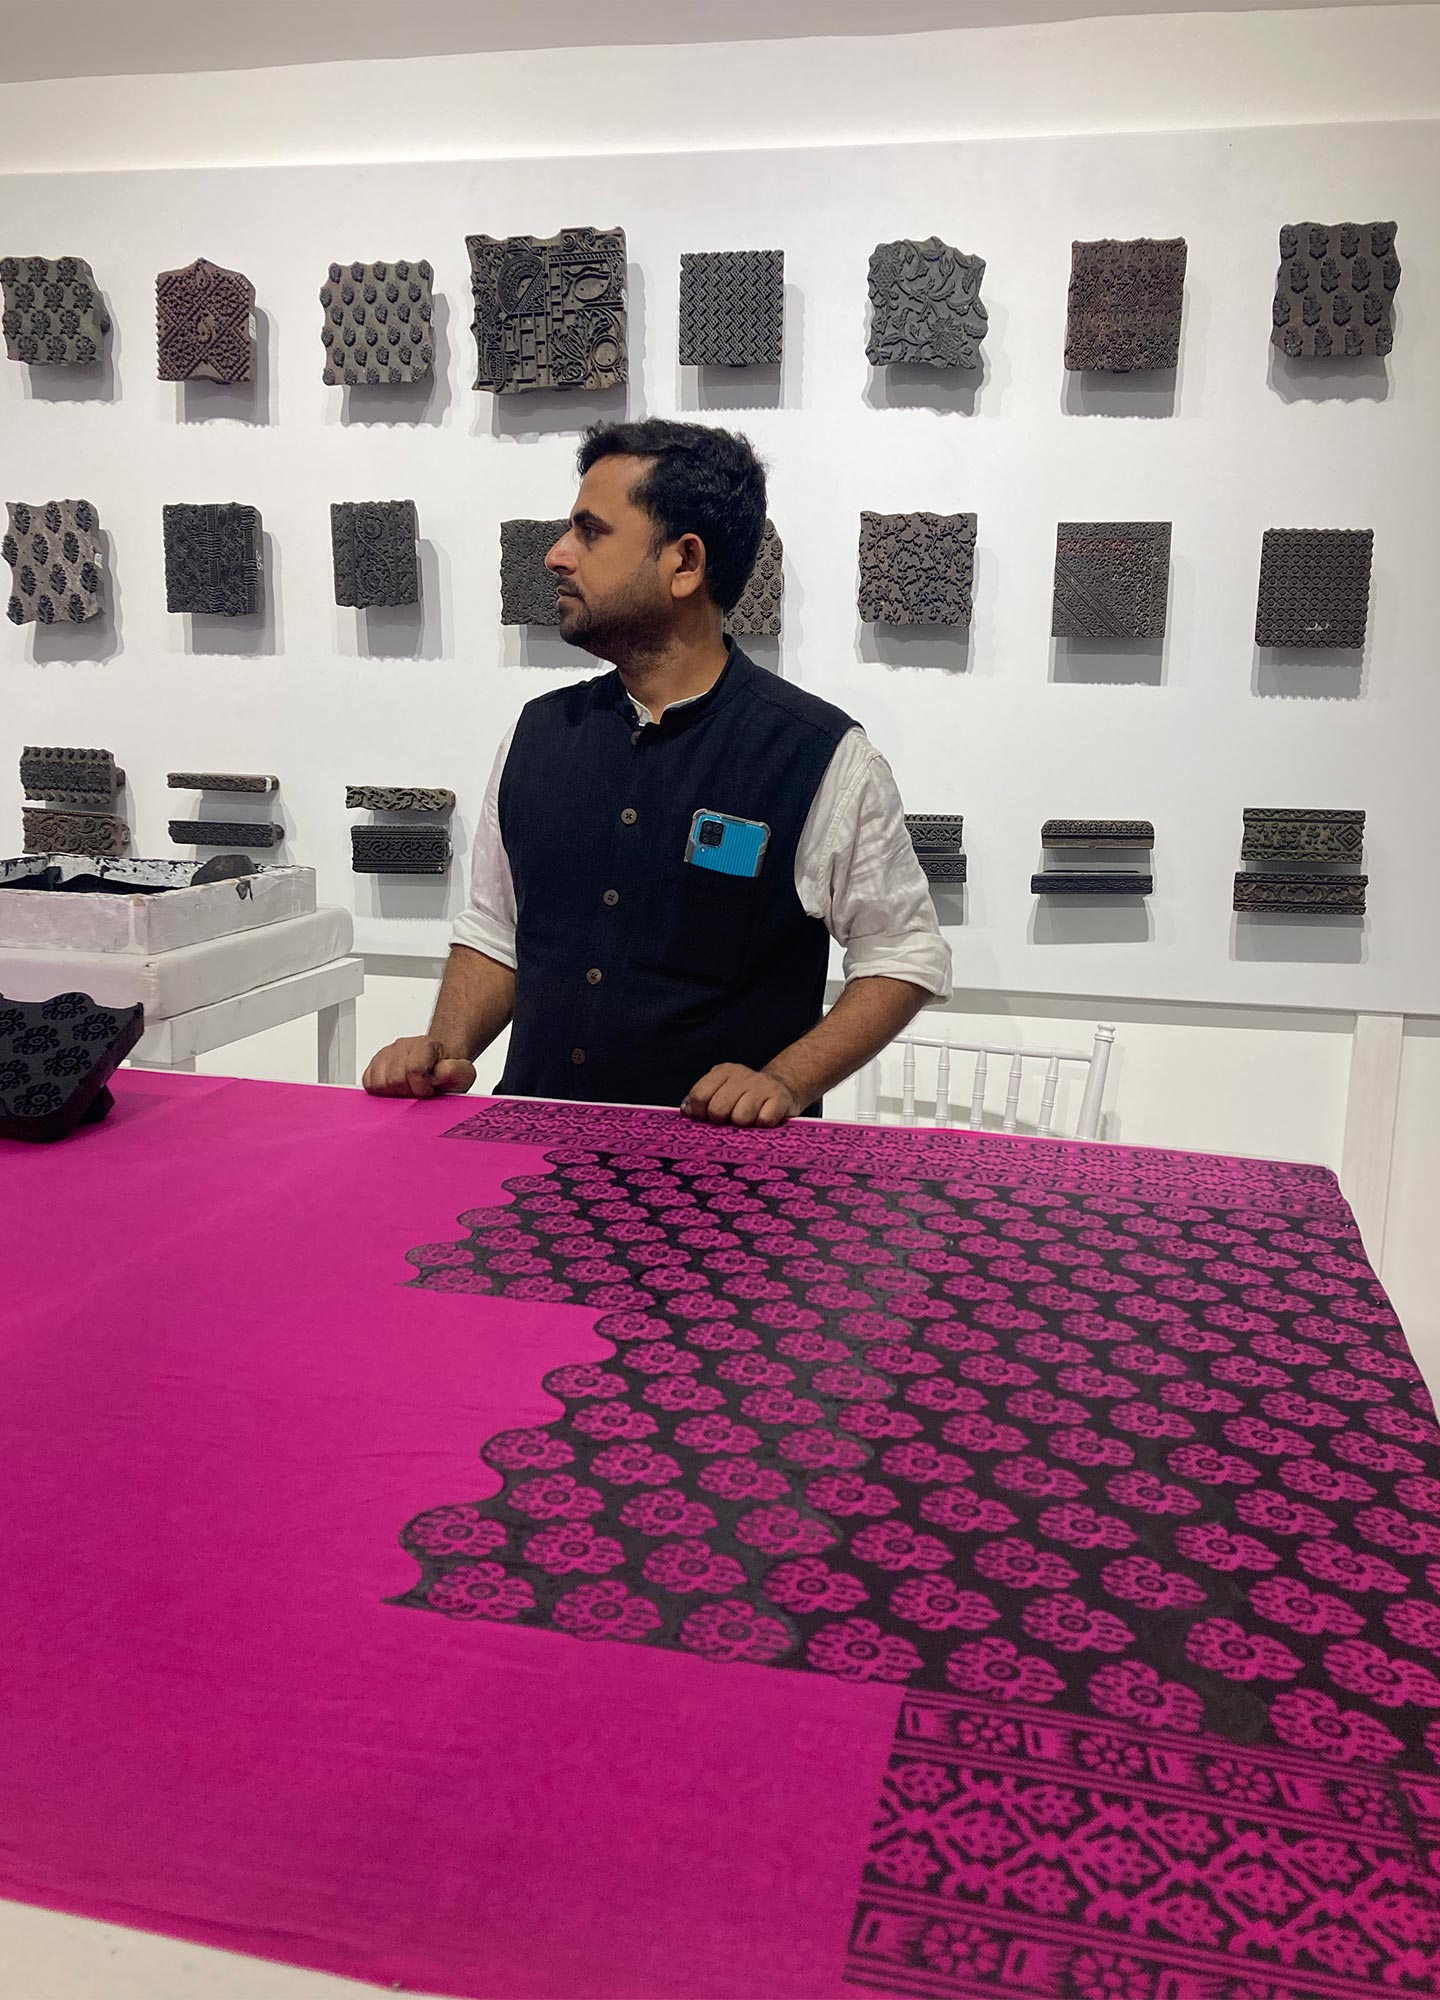 For one of the pieces specially produced for Maria Grazia Chiuri's Dior Fall 23 show in Mumbai, artisans from the Chanakya ateliers used a technique that traces its roots in India back millennia - block printing © Mevin Murden 